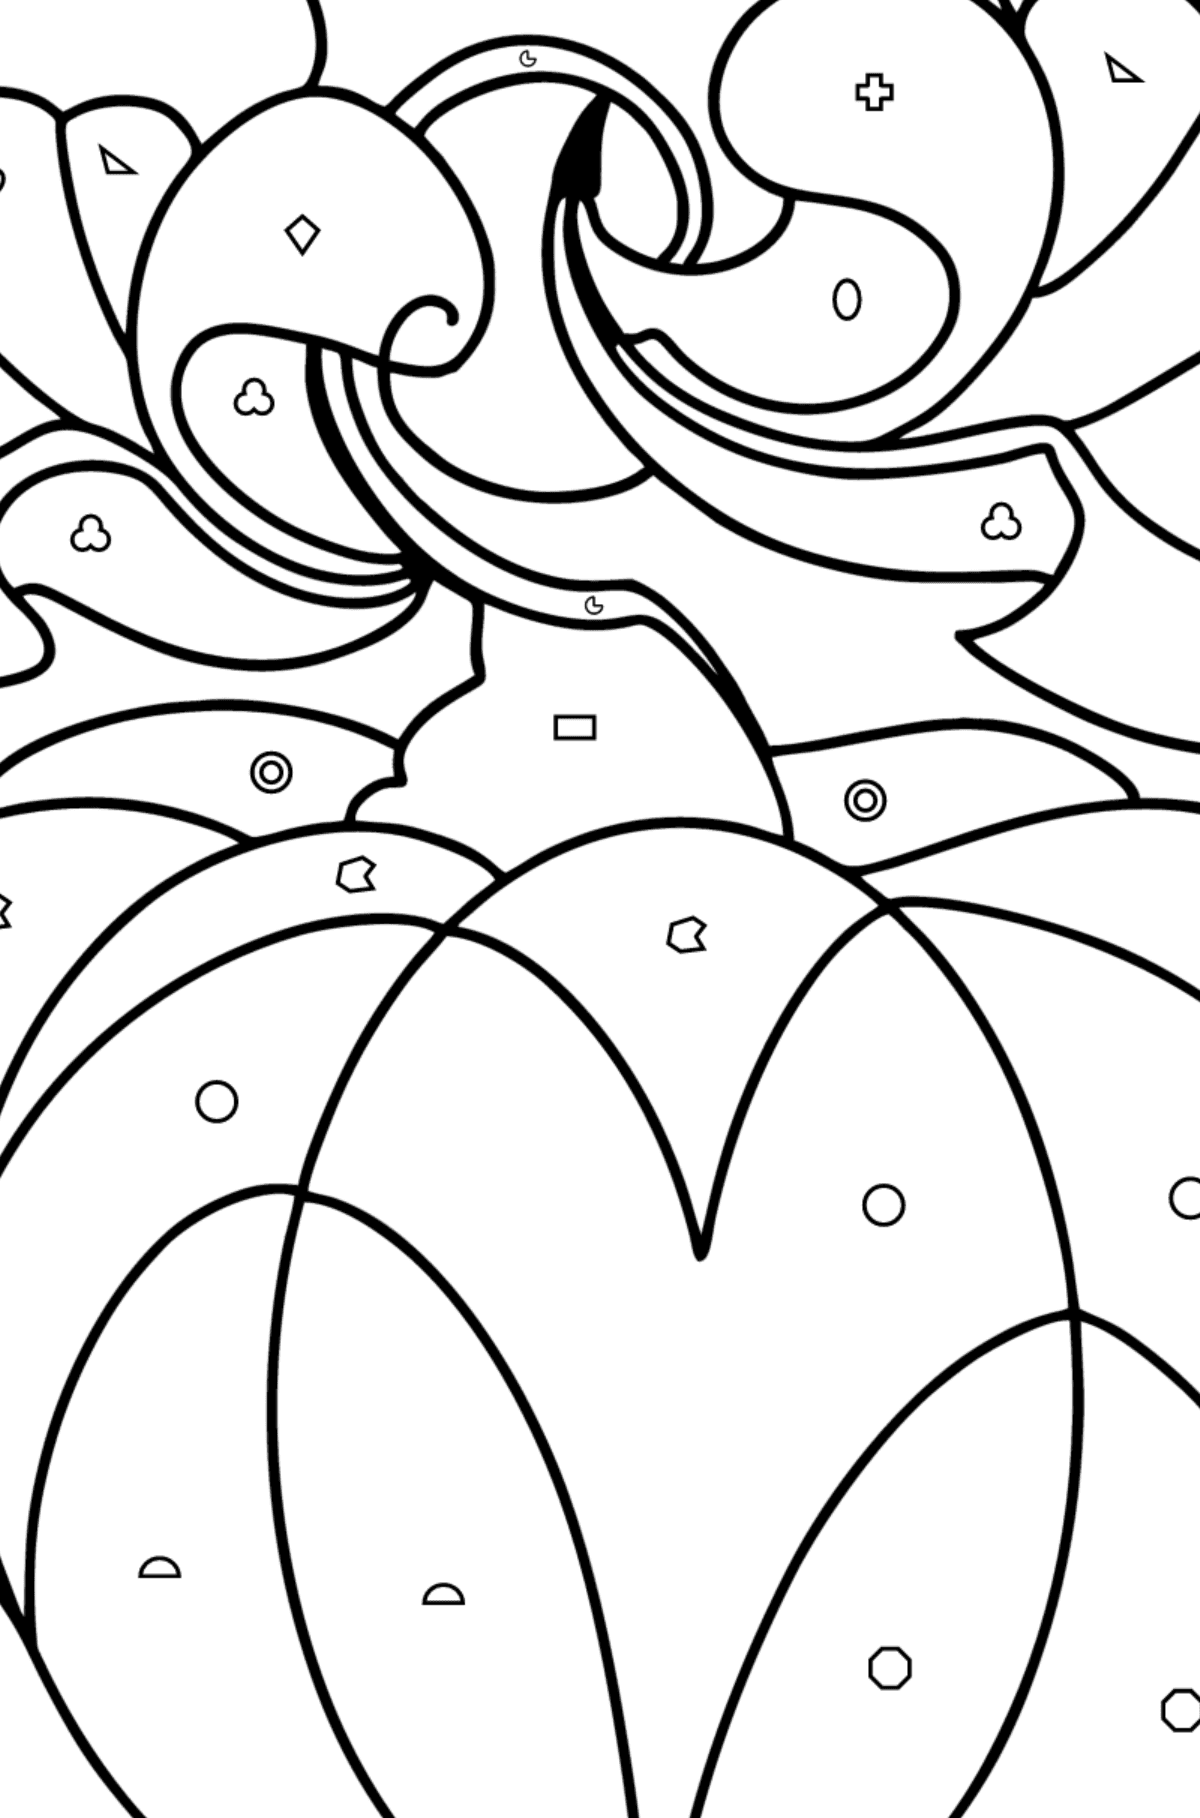 Calming Anti stress Pumpkin coloring page - Coloring by Geometric Shapes for Kids